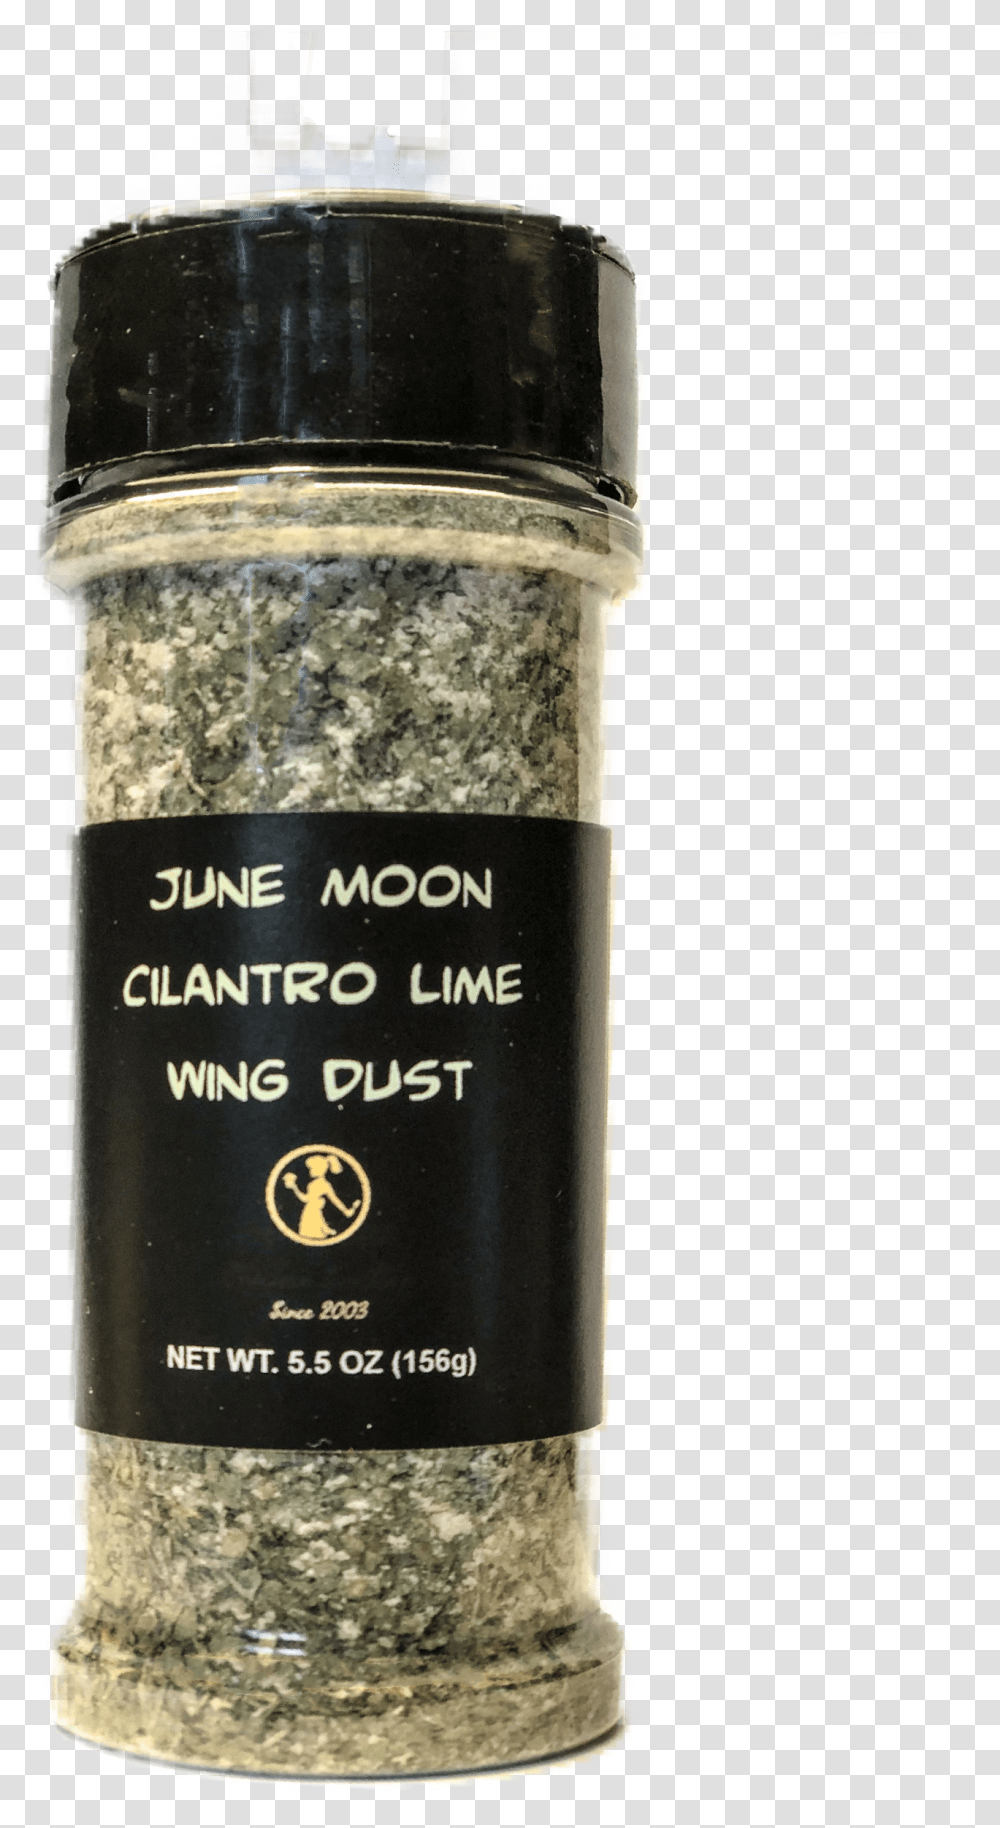 June Moon Cilantro Lime Wing Dust Blended In Small Cumin, Bottle, Beer, Alcohol, Beverage Transparent Png